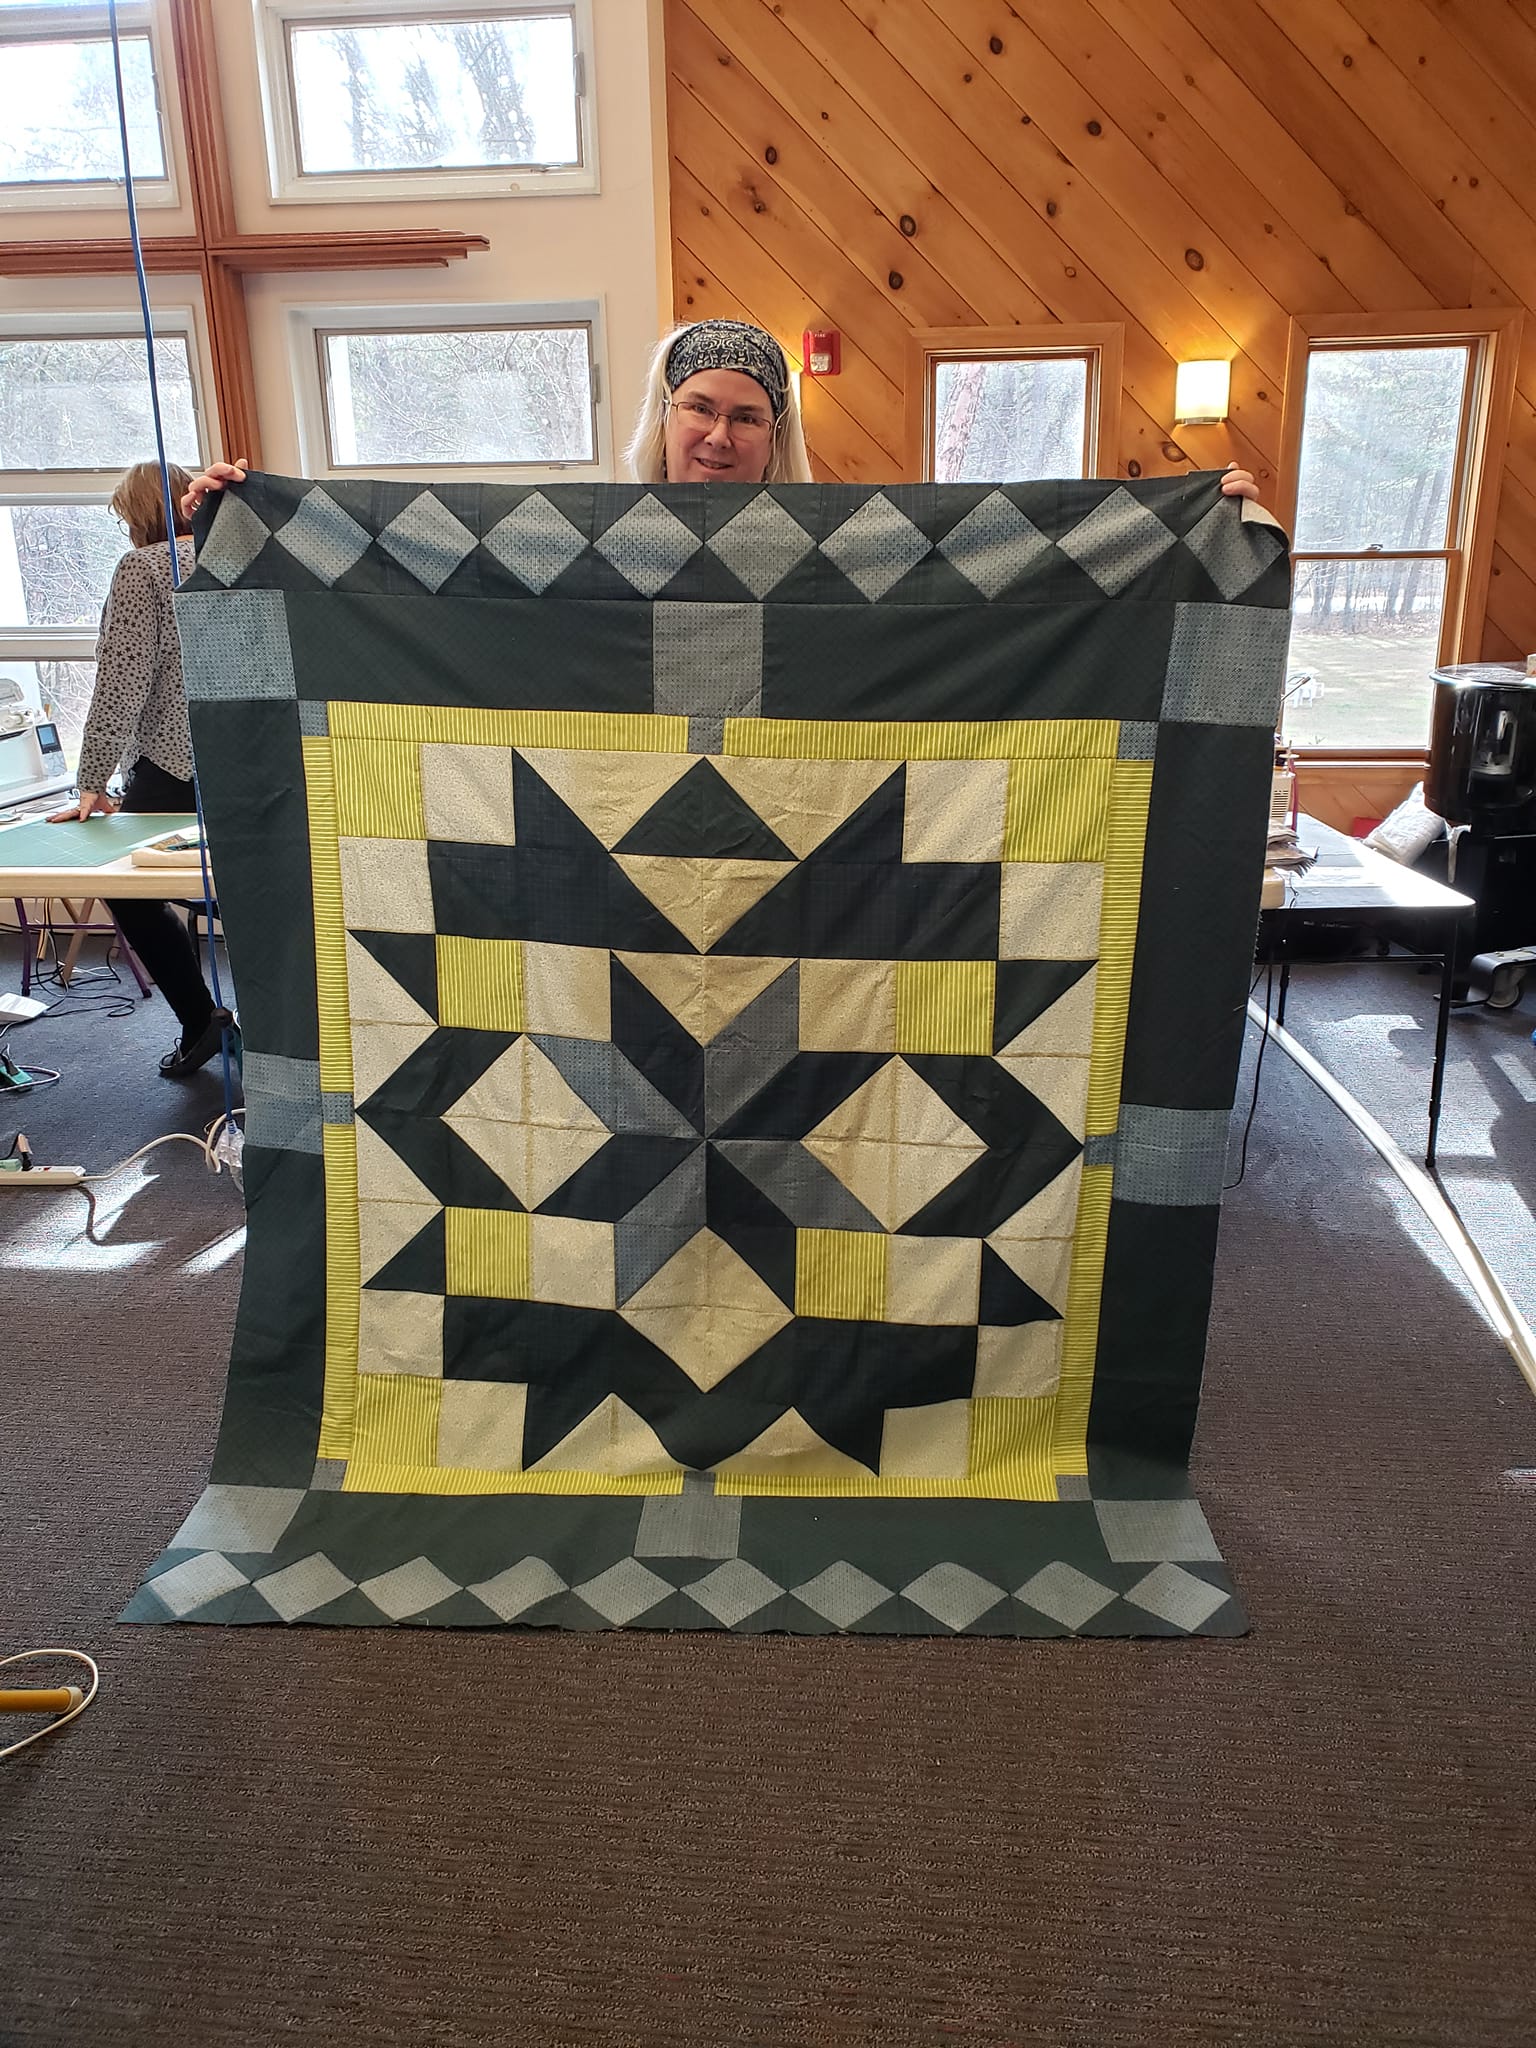 Another Jody's Quilt